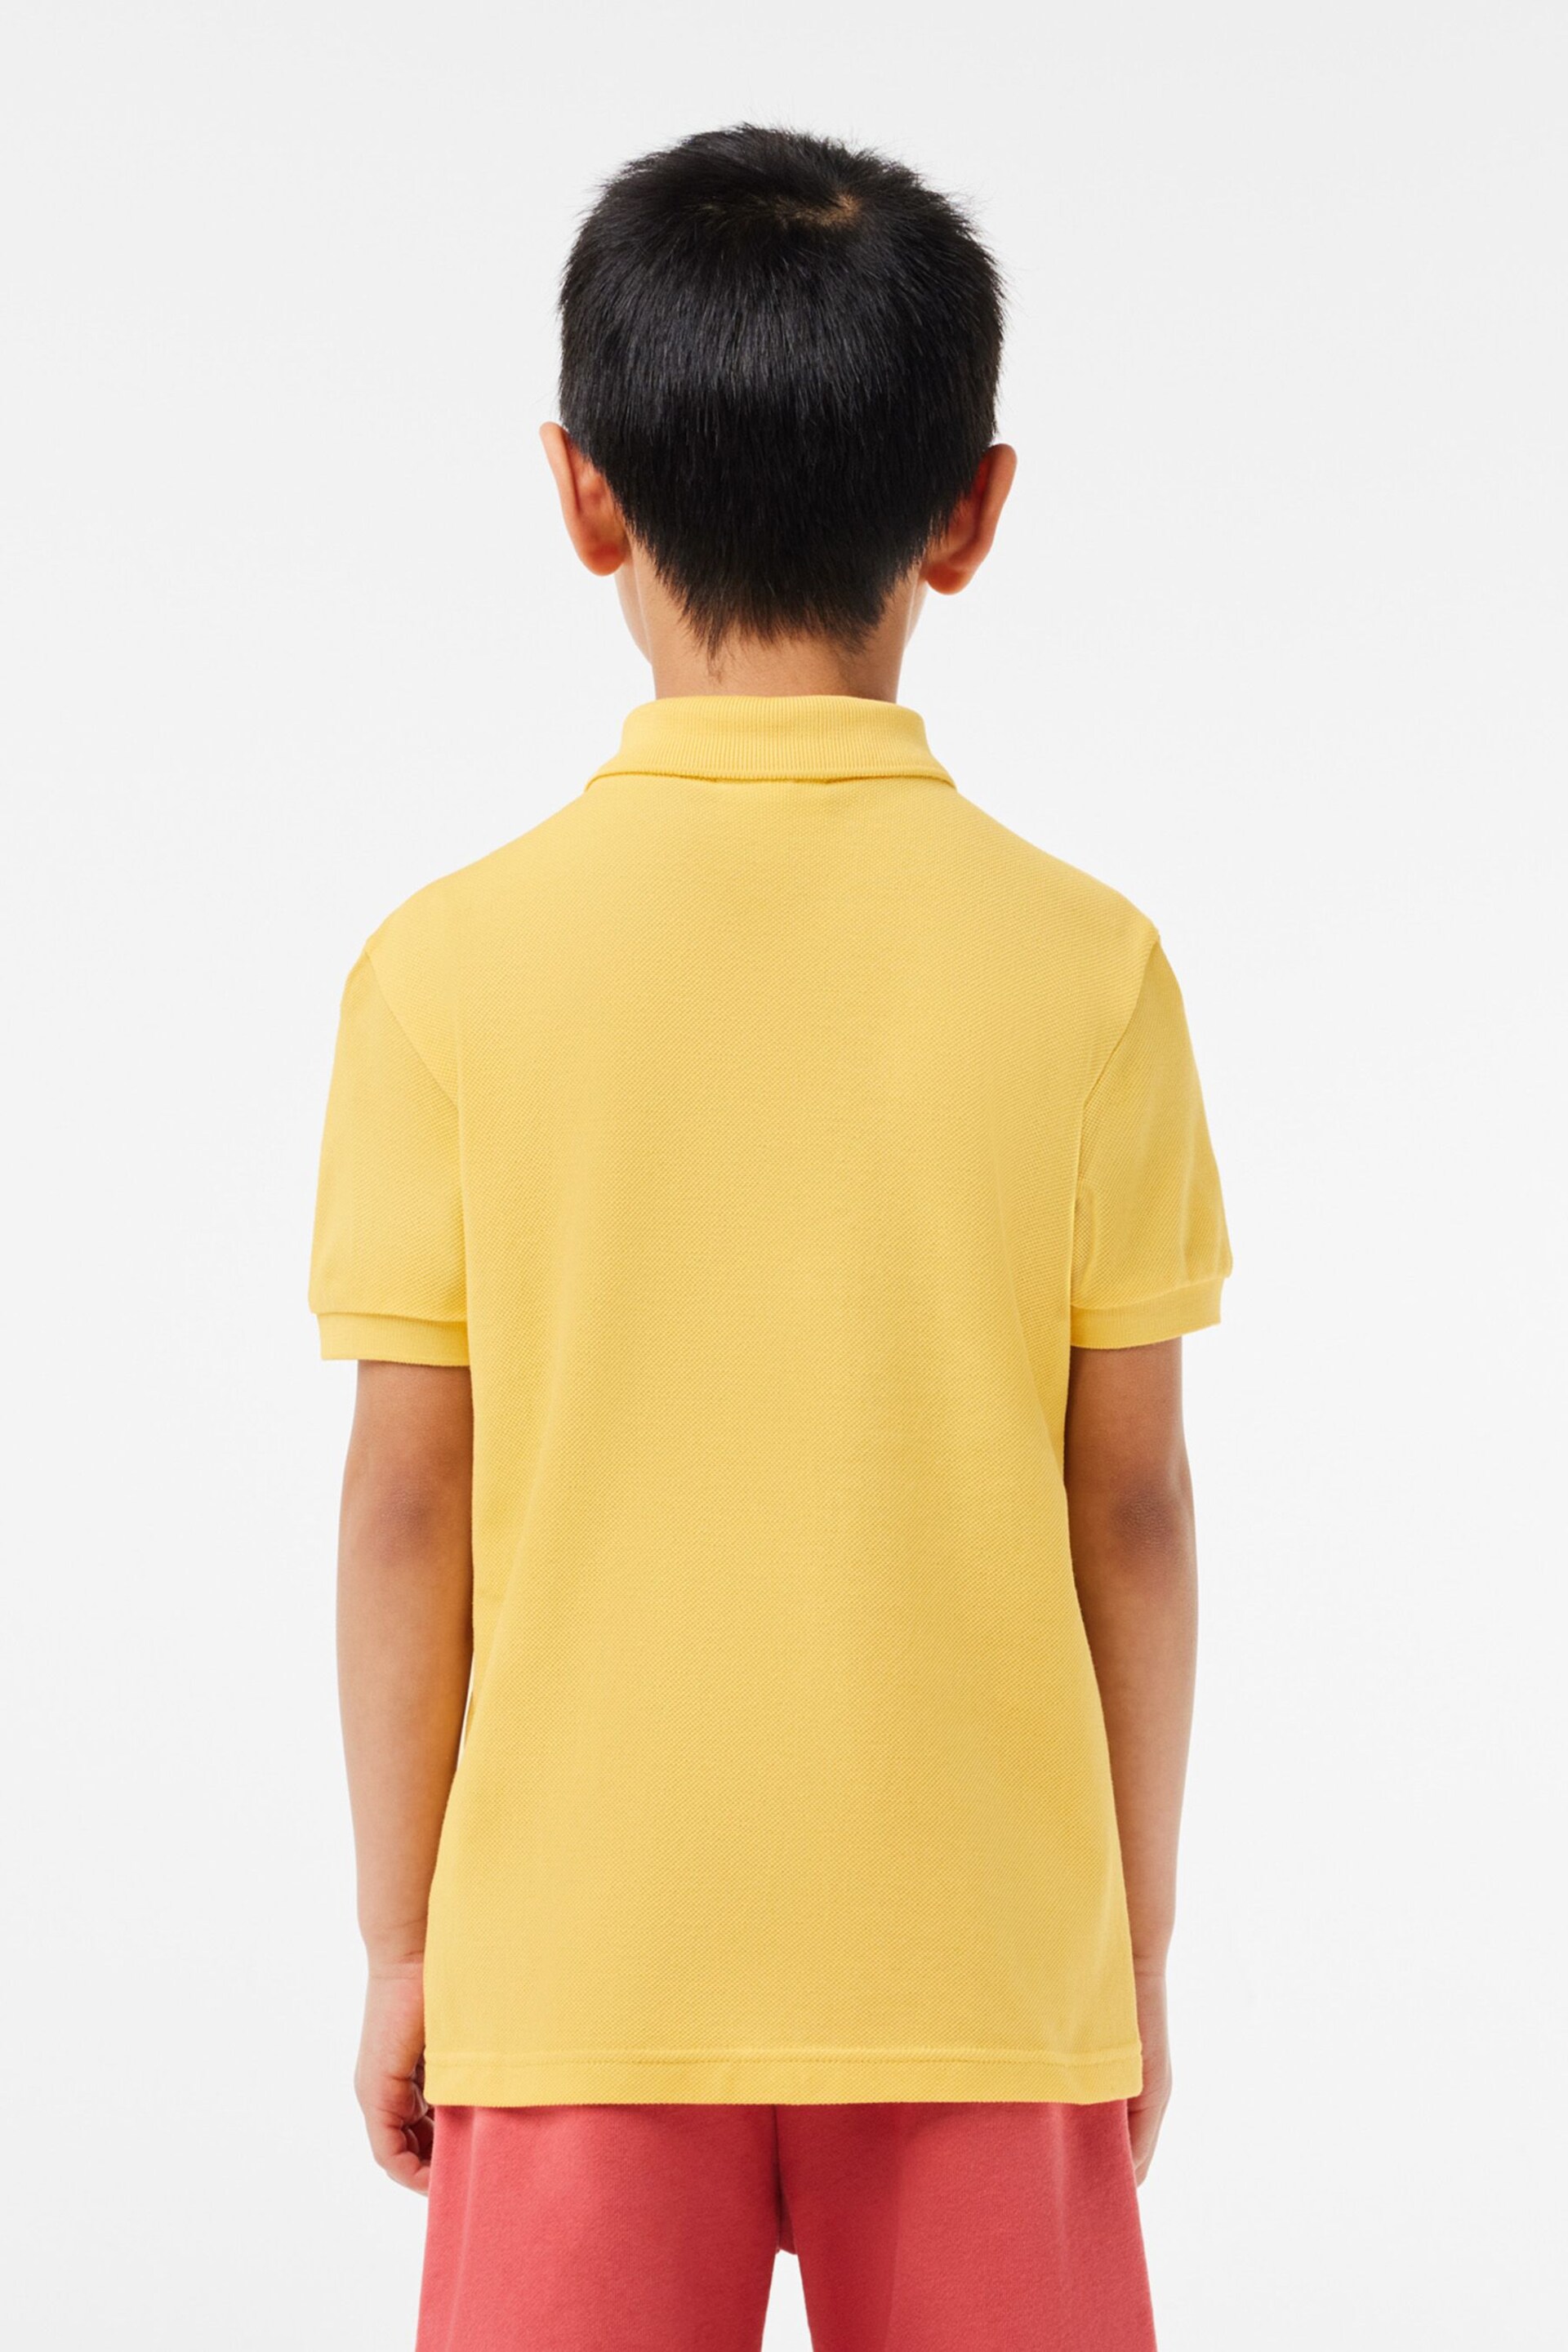 Lacoste Children's Updated Logo Polo Shirt - Image 2 of 7